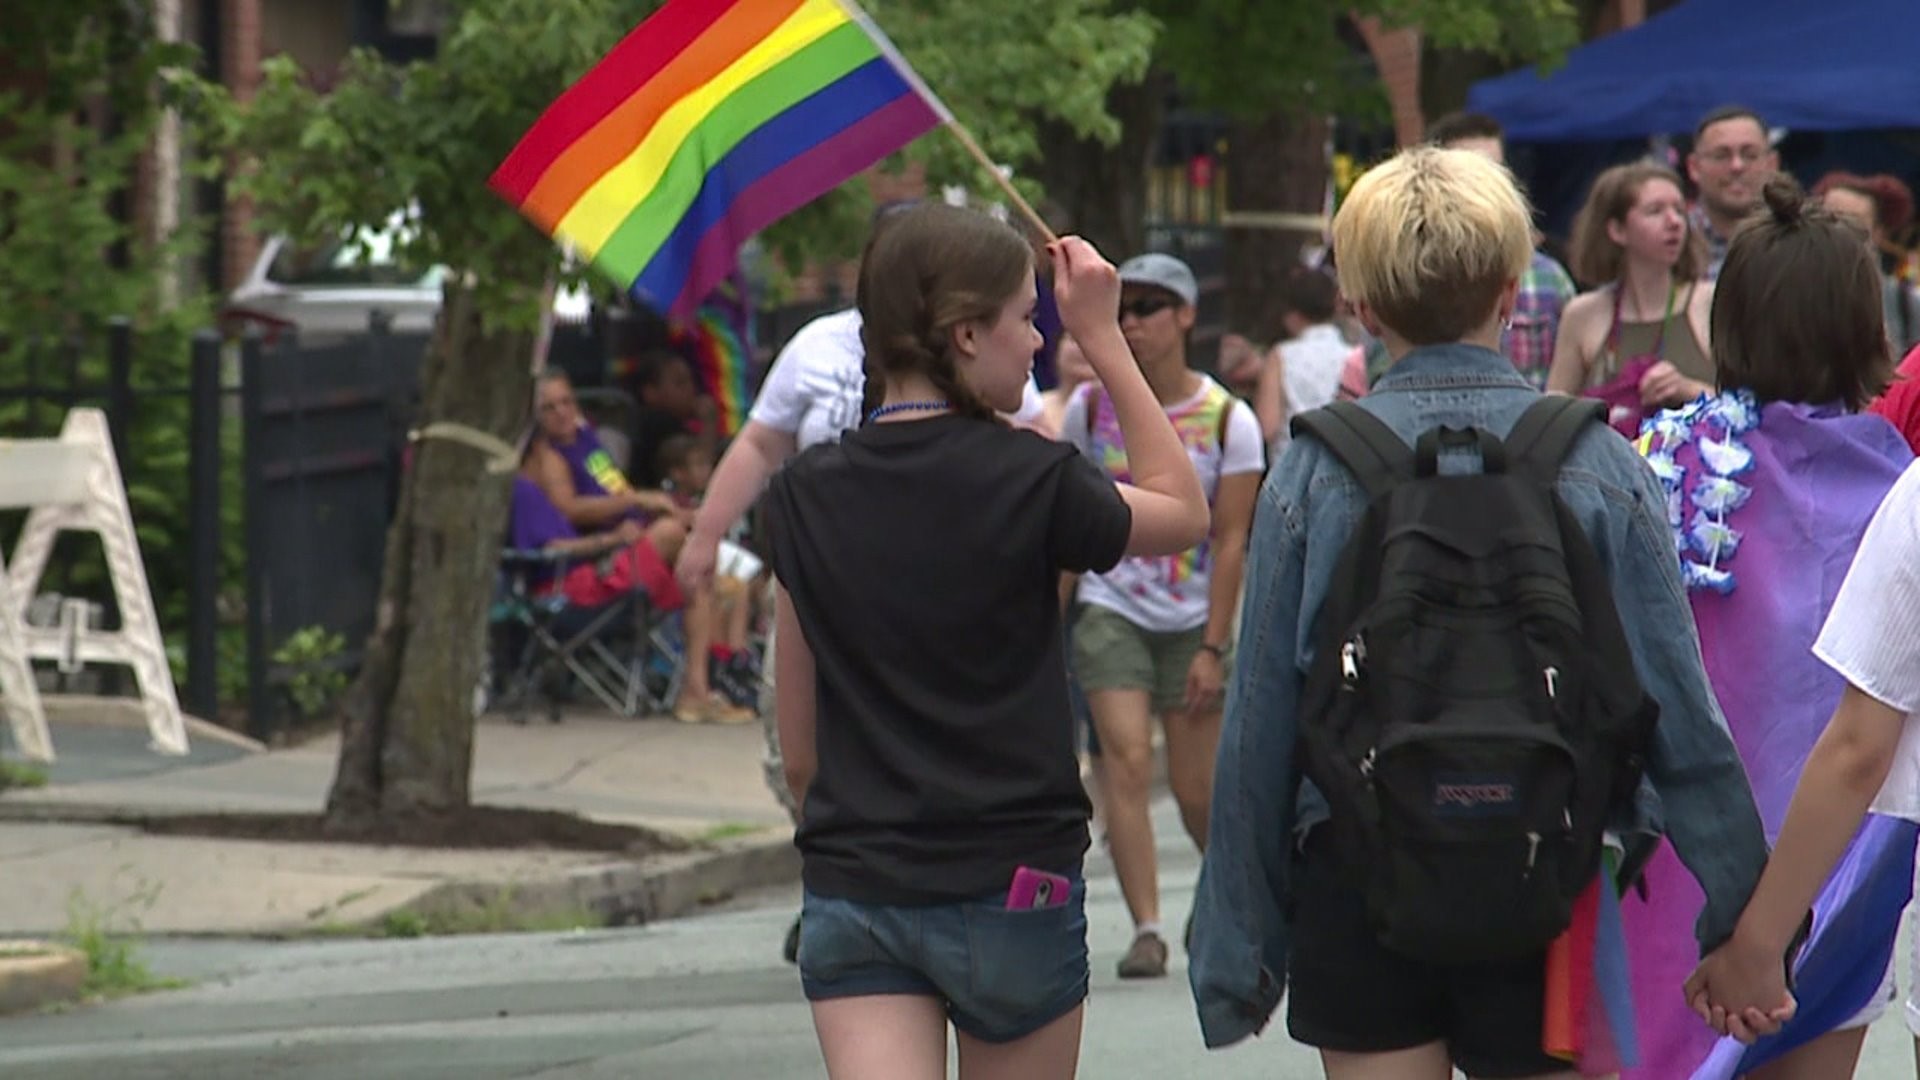 The largest Lancaster Pride Festival will be held in the Lancaster County Convention Center.